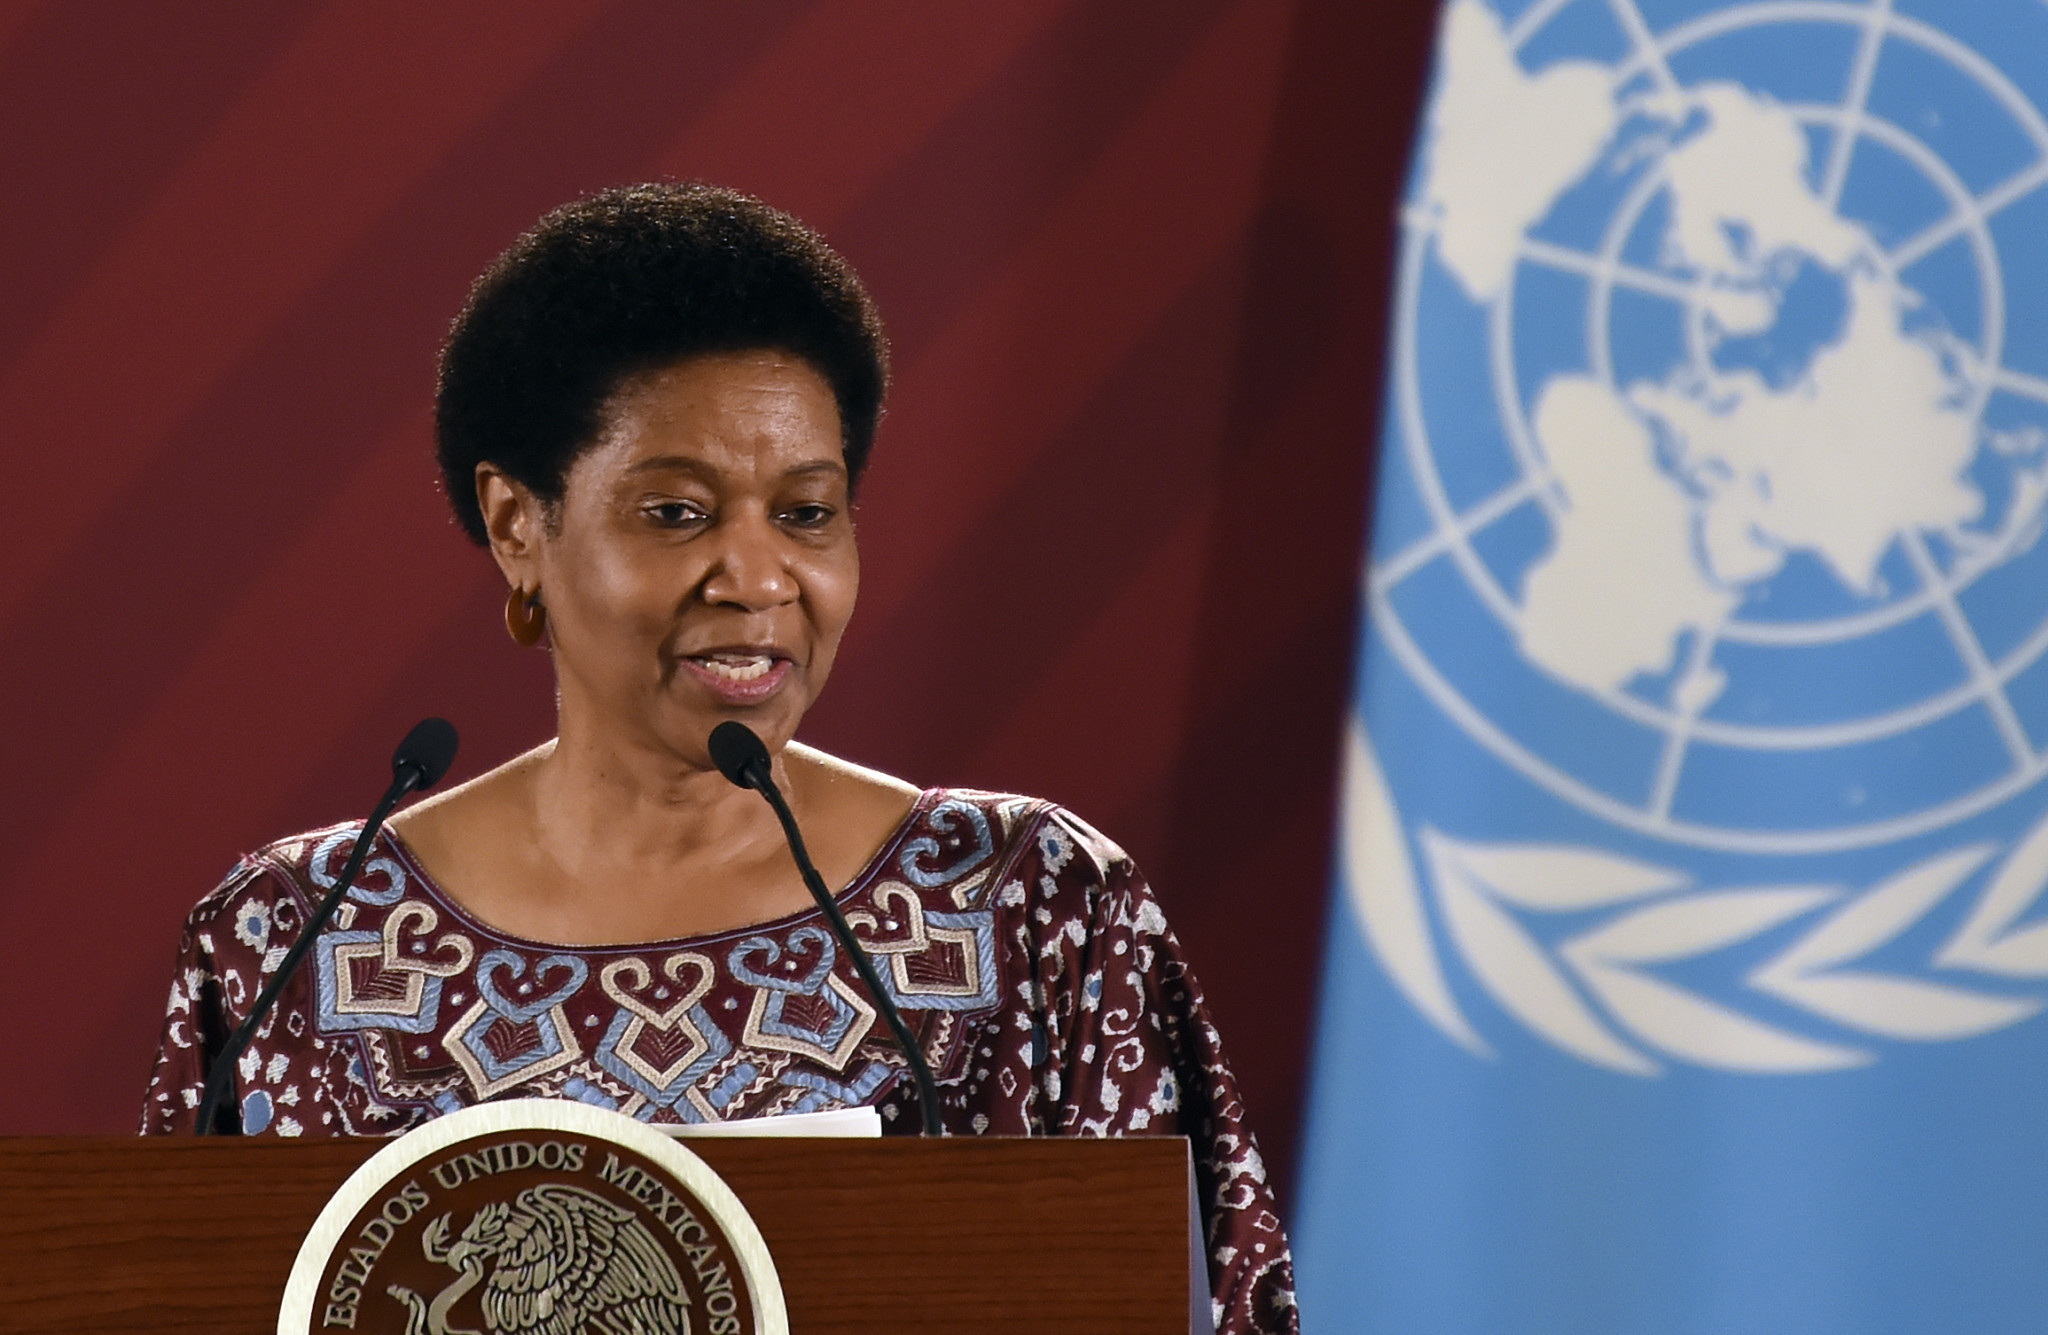 South African official Phumzile Mlambo-Ngcuka has been appointed to head up the IOC Advisory Committee on Human Rights ©Getty Images